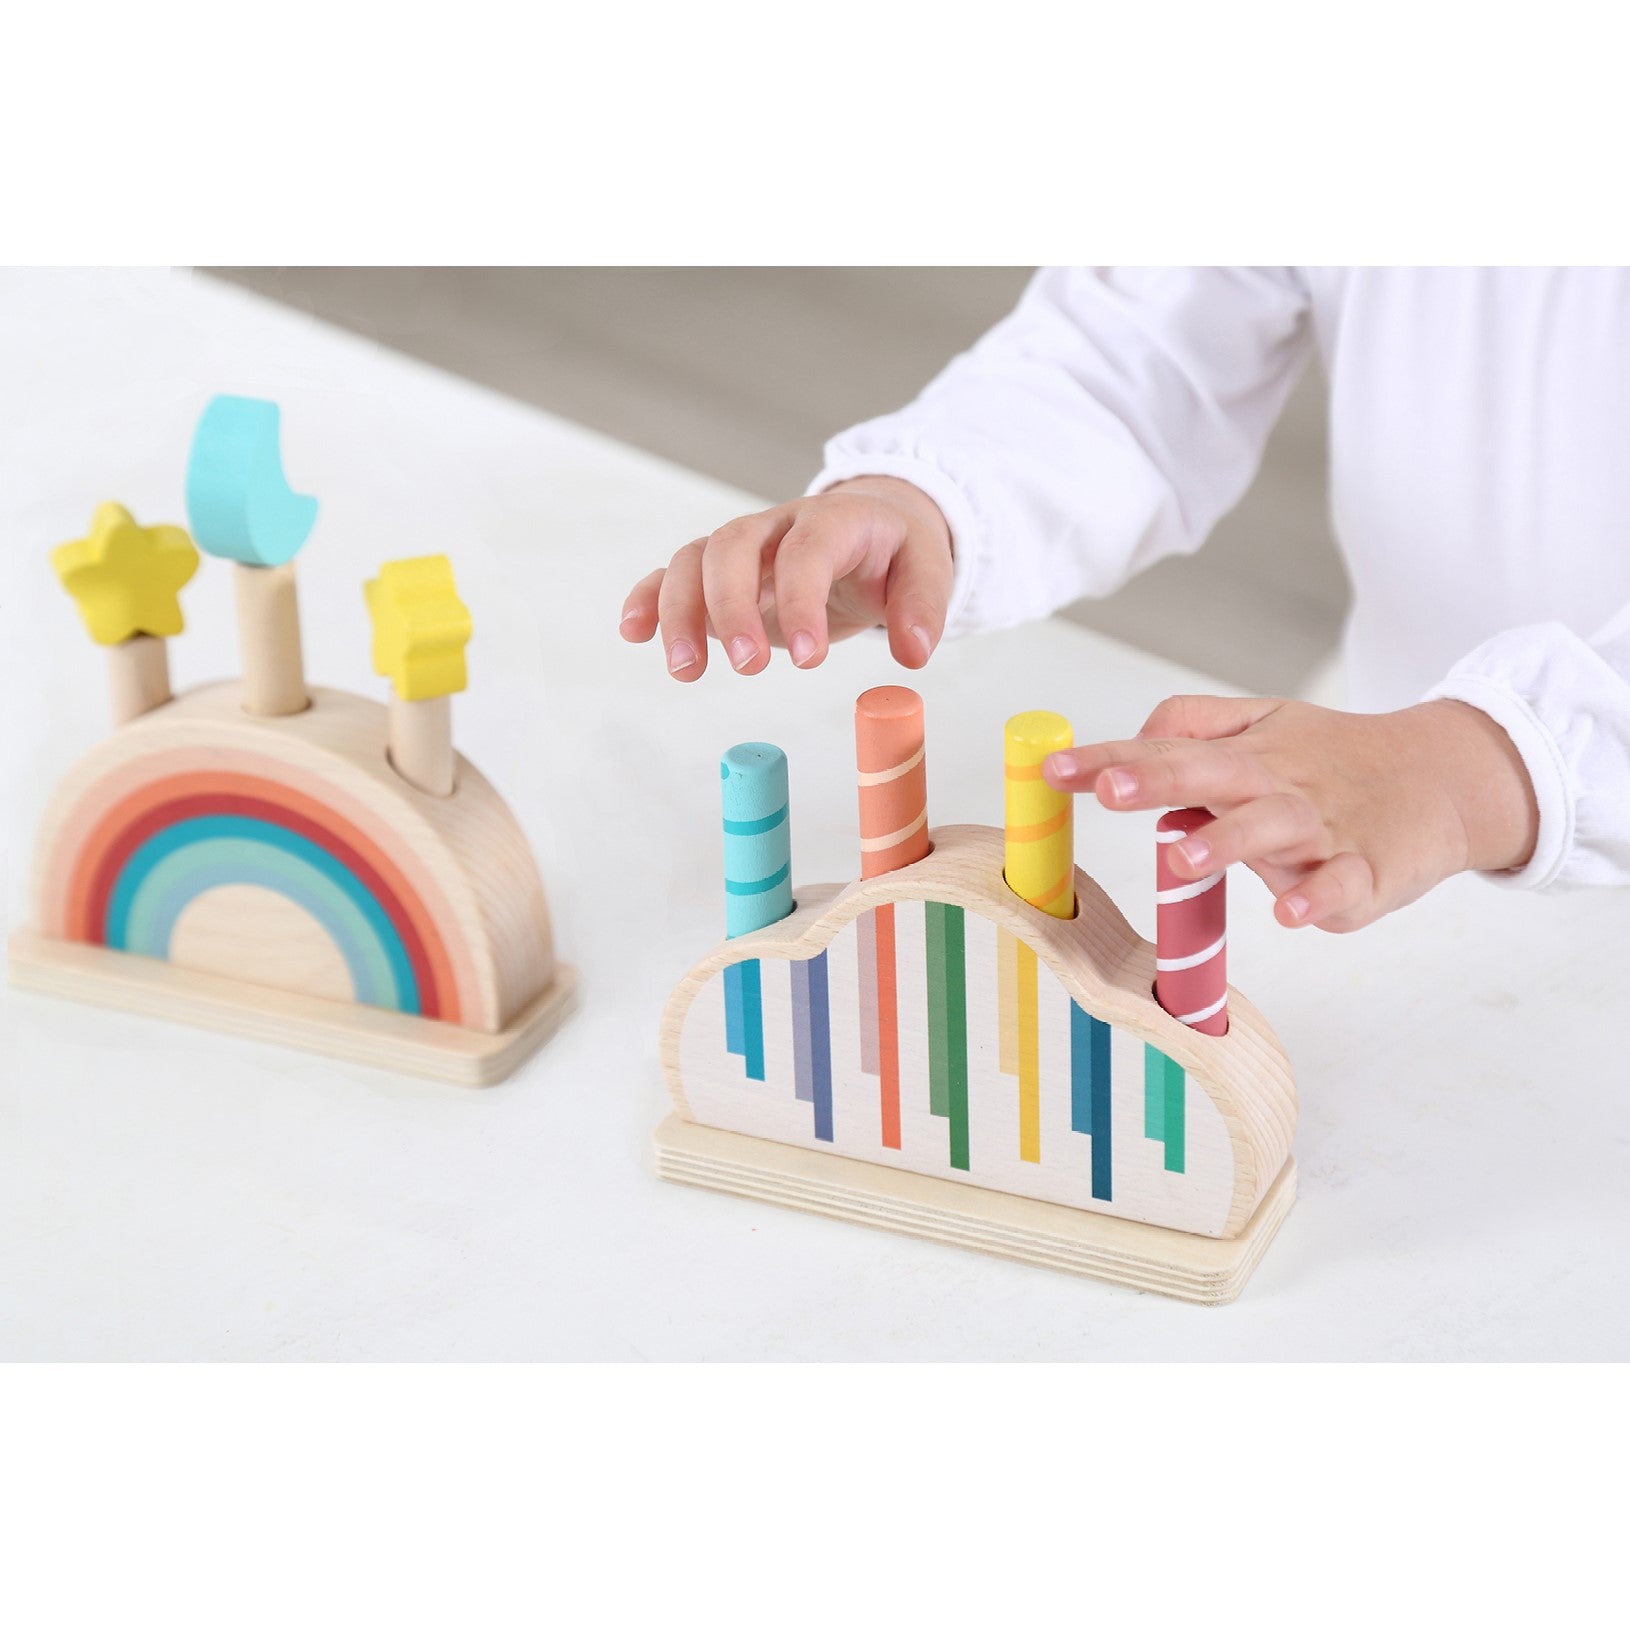 Calm and Breezy pop up wooden toy designs